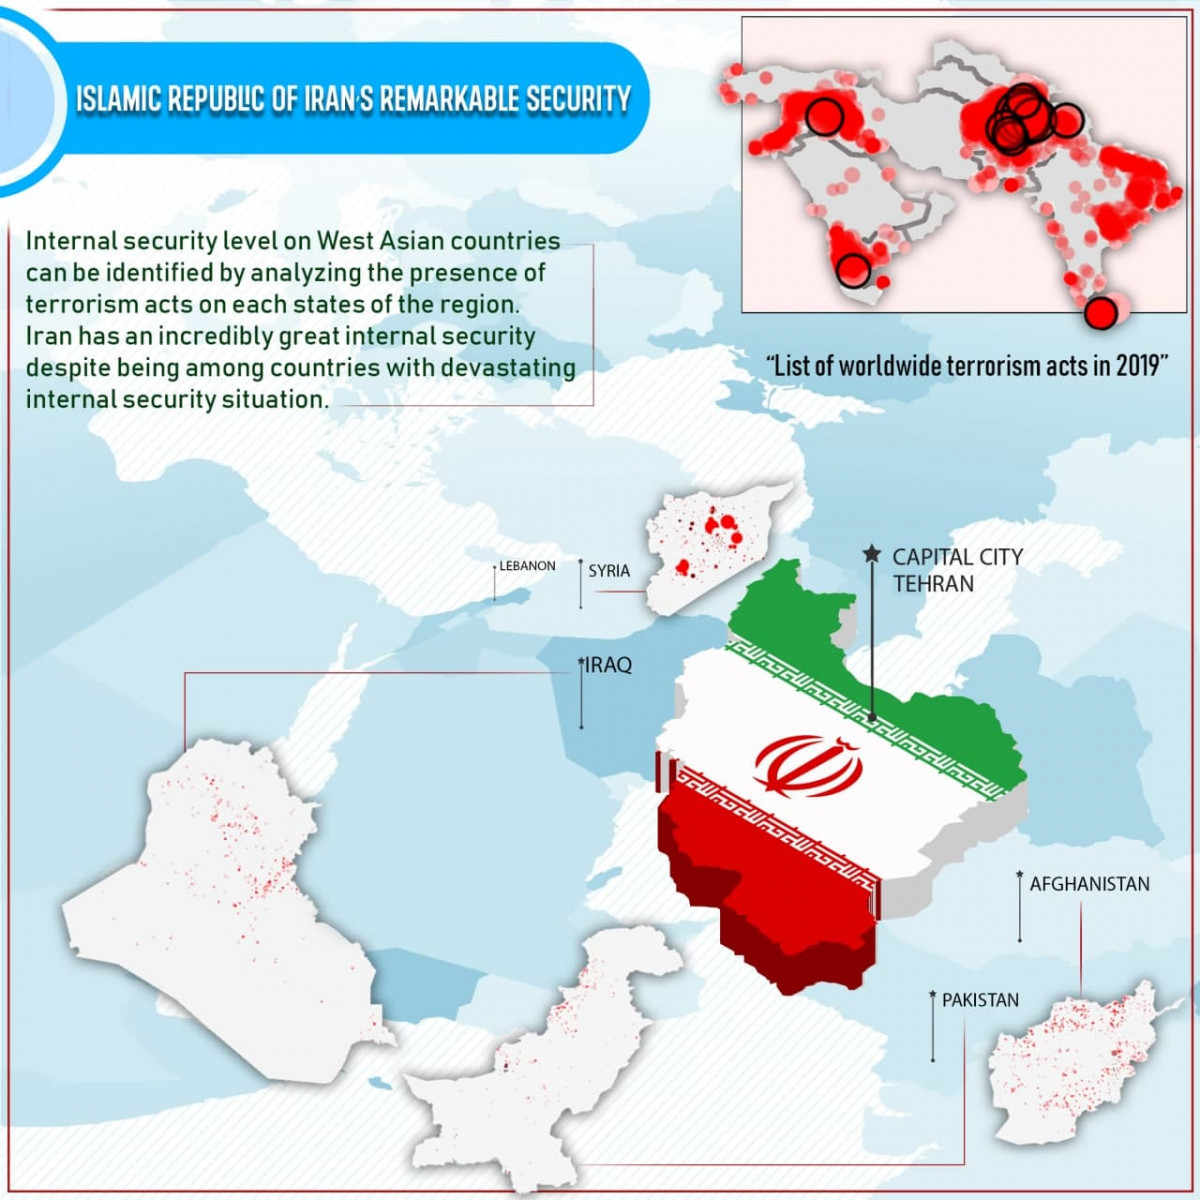 ISLAMIC REPUBLIC OF IRAN'S REMARKABLE SECURITY